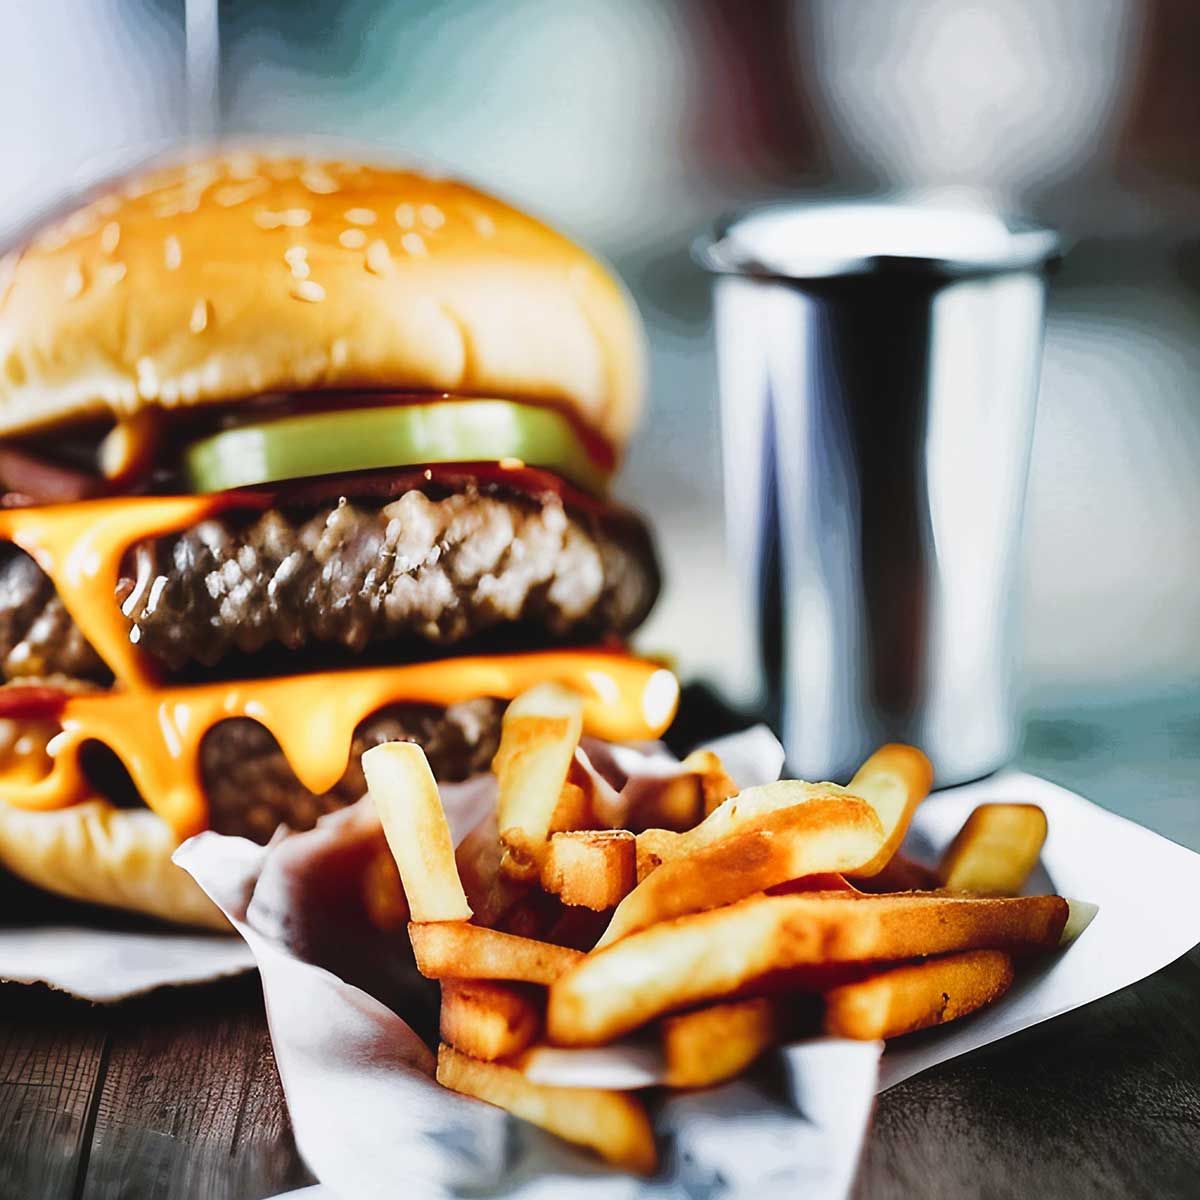 Stylized detailed composition of cheeseburger and french fries on wood table with blurred background.